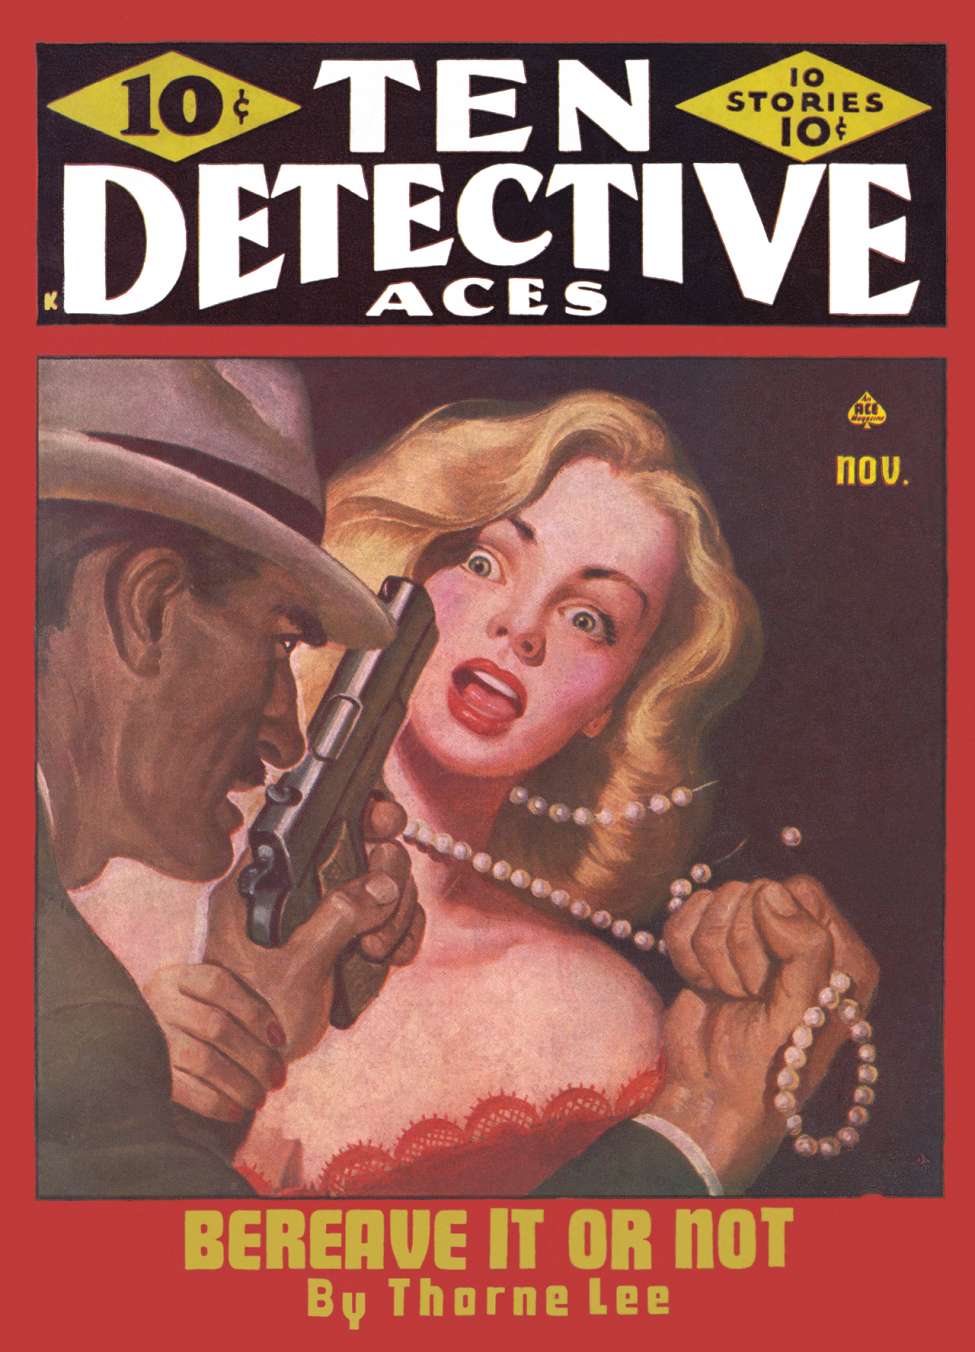 Comic Book Cover For Ten Detective Aces v51 4